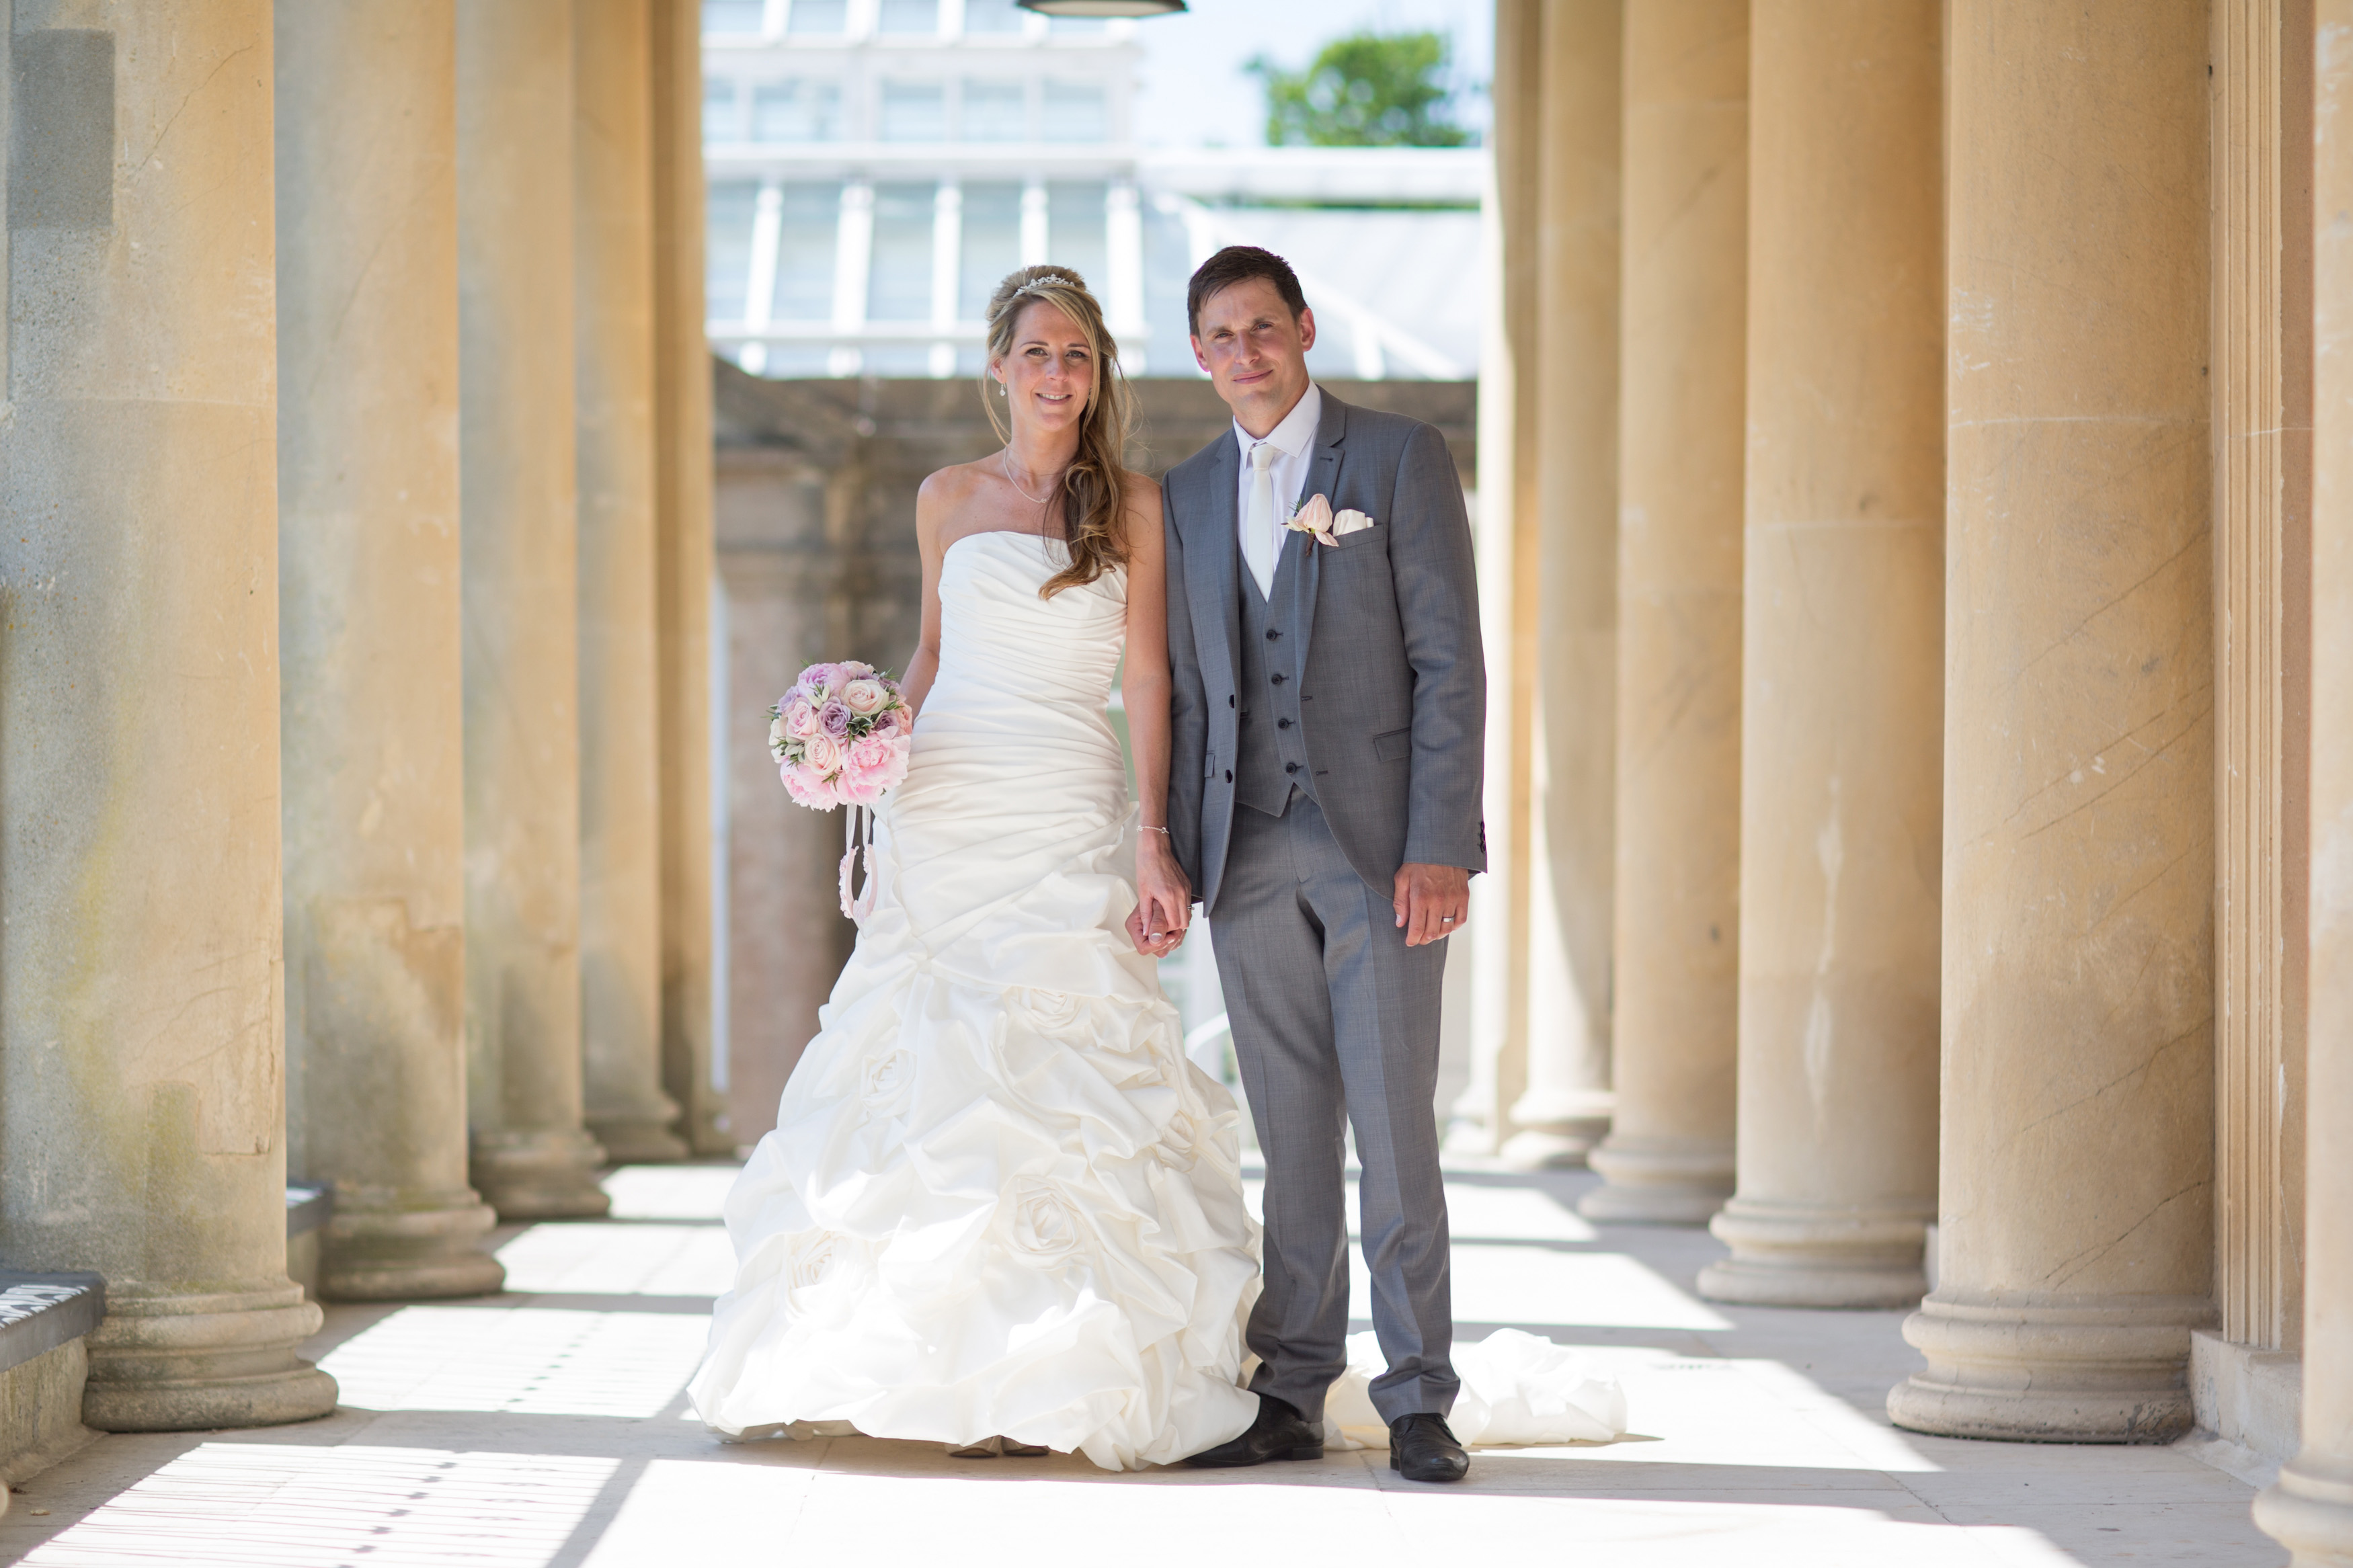 Real Wedding: Elissa & Luke’s Country House Wedding at Buxted Park Hotel